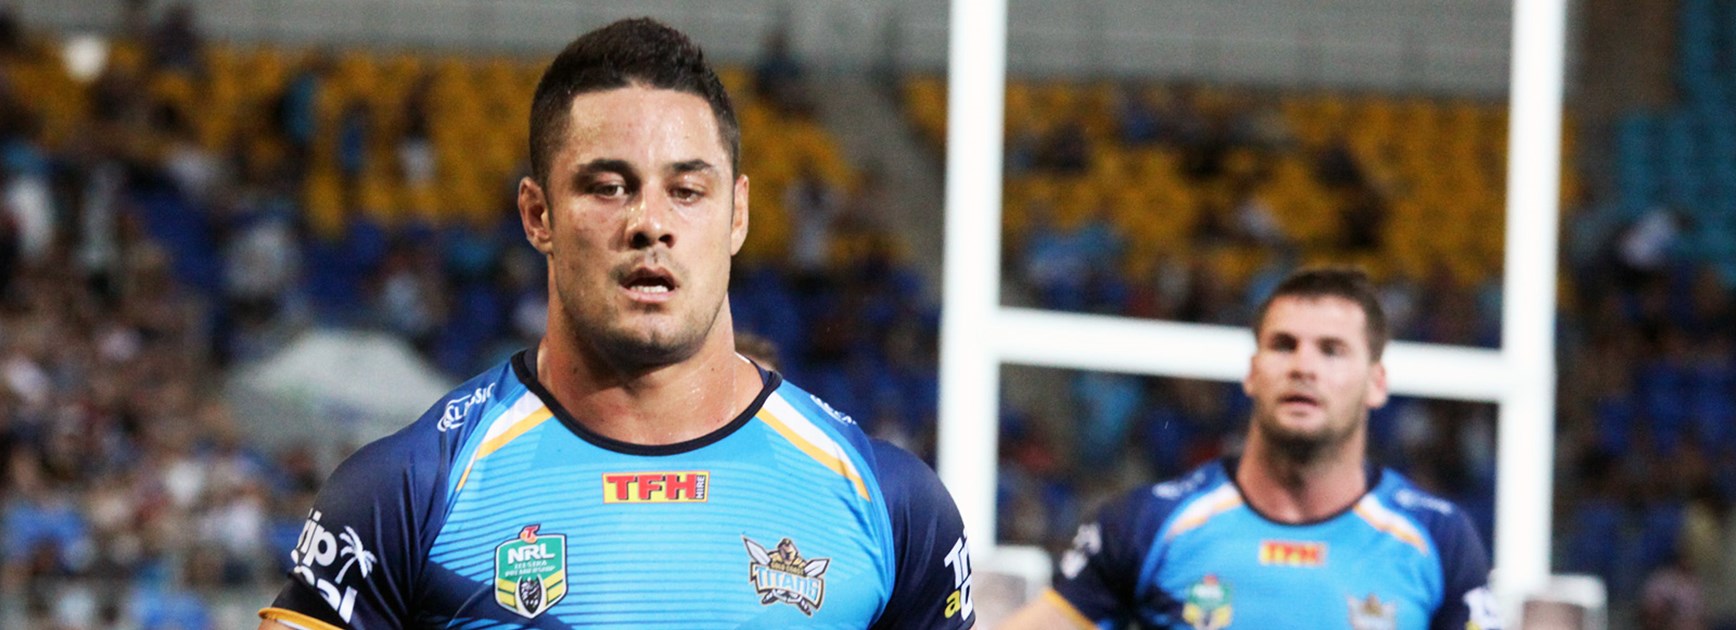 Jarryd Hayne during the Titans' Round 1 loss to the Roosters.